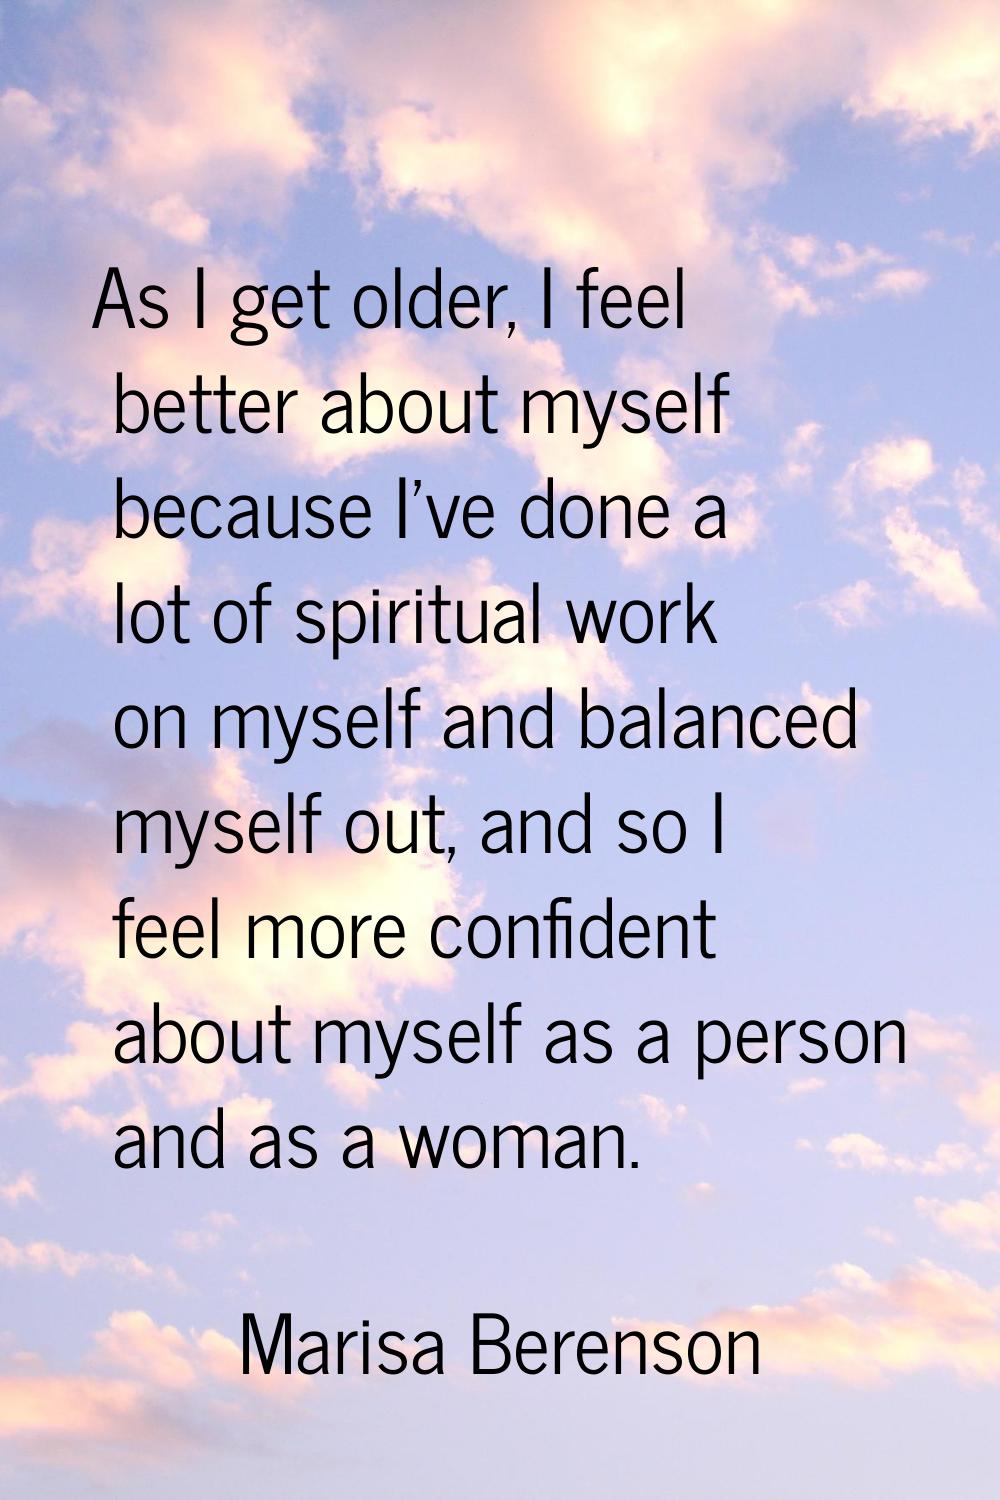 As I get older, I feel better about myself because I've done a lot of spiritual work on myself and 